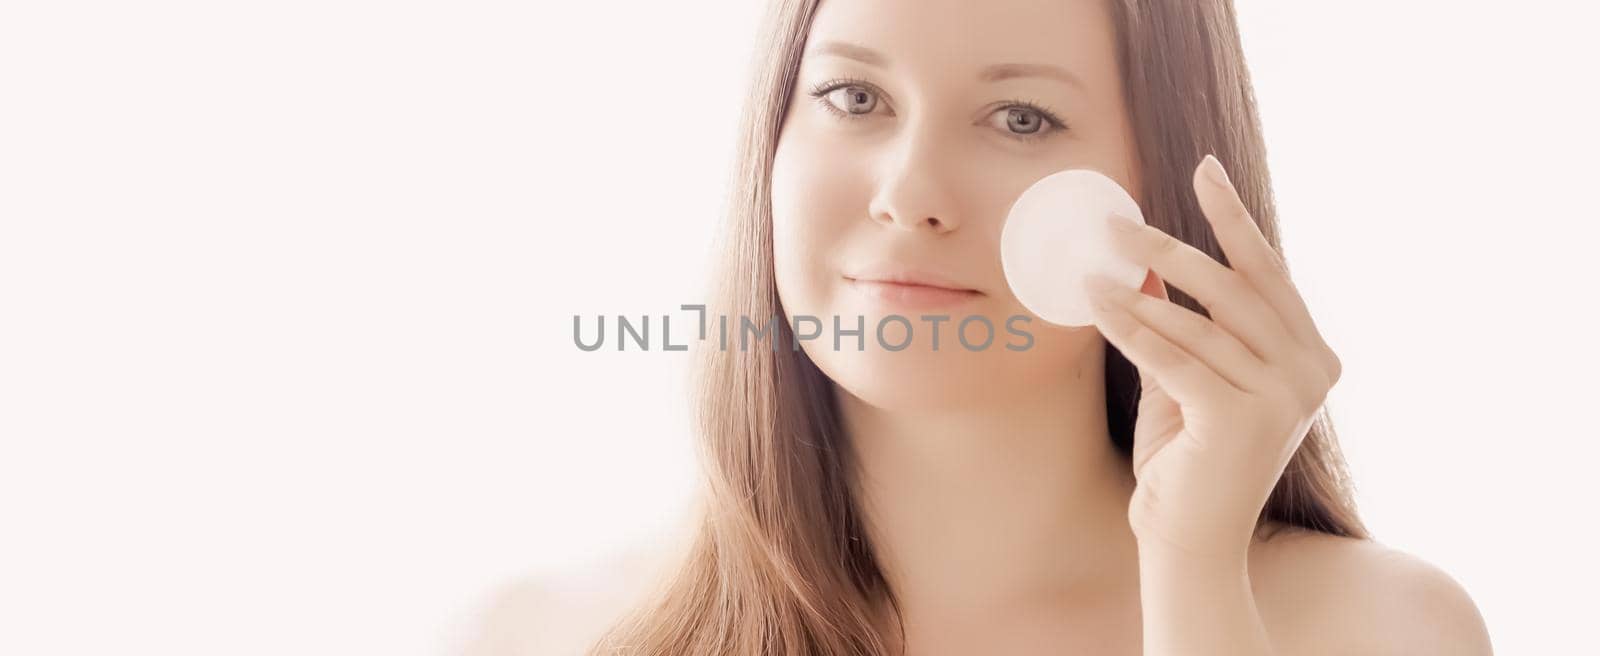 Beautiful woman with cotton pad, perfect skin and shiny hair as make-up, health and wellness concept. Face portrait of young female model for skincare cosmetics and luxury beauty ad design by Anneleven